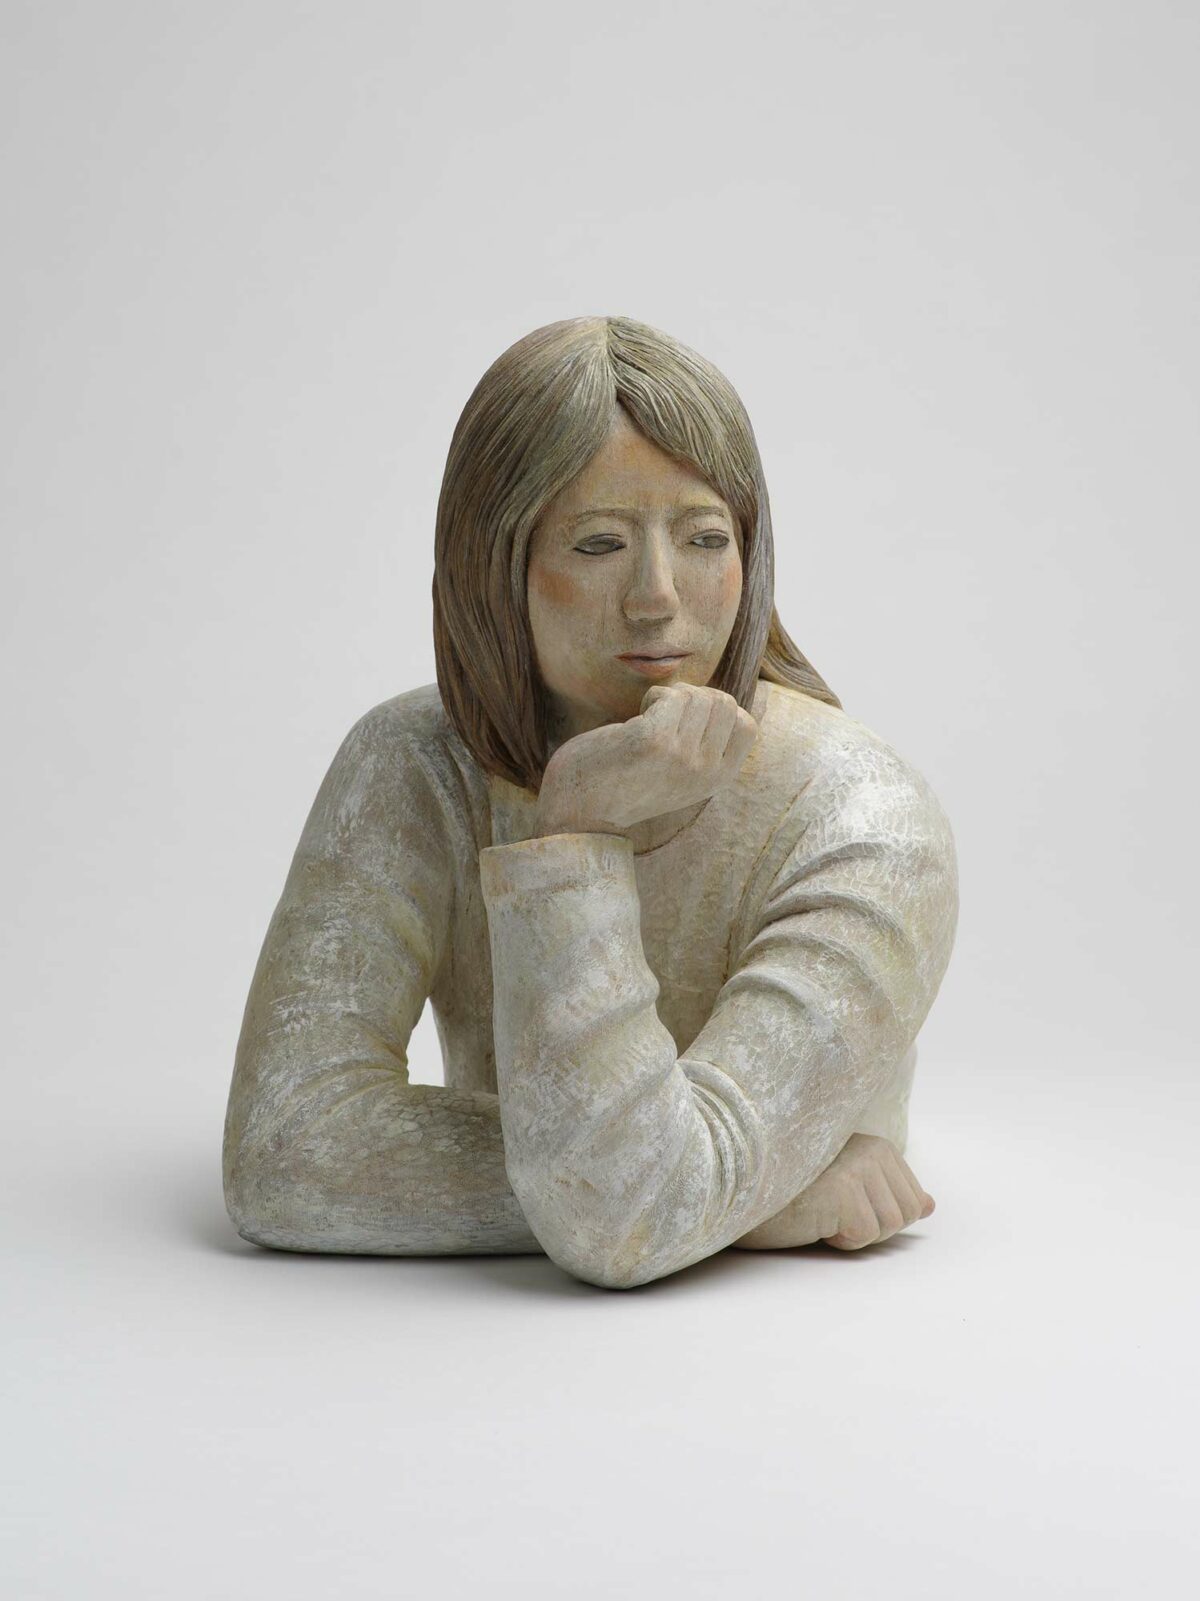 Incredibly Realistic Wood Carved Sculptures By Ikuo Inada (9)